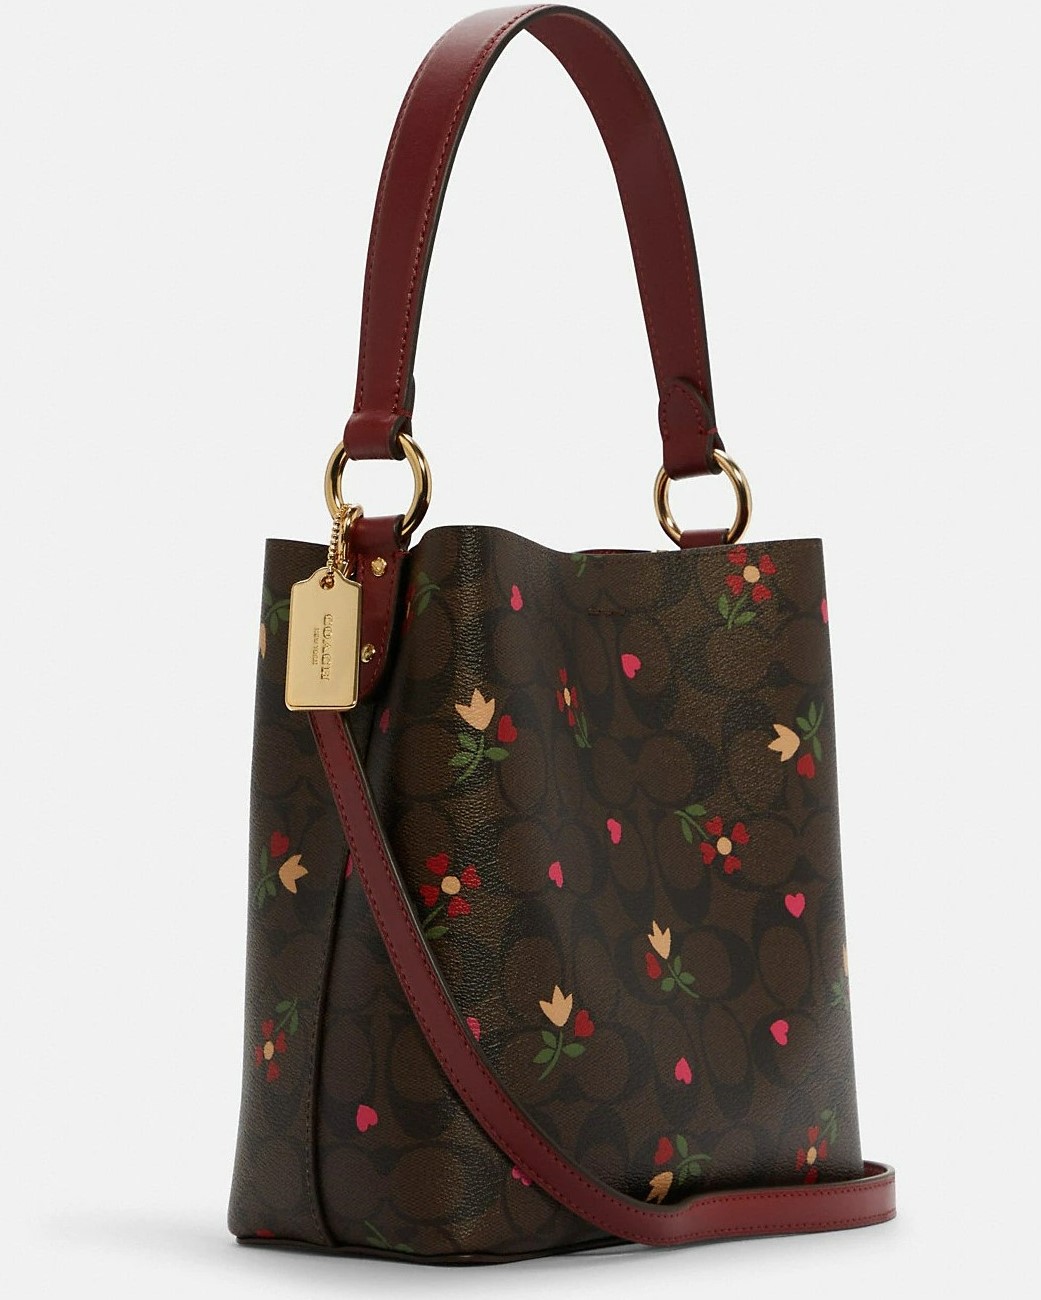 TÚI XÁCH NỮ COACH SMALL TOWN BUCKET BAG IN BROWN MULTI SIGNATURE CANVAS WITH HEART PETAL PRINT 5